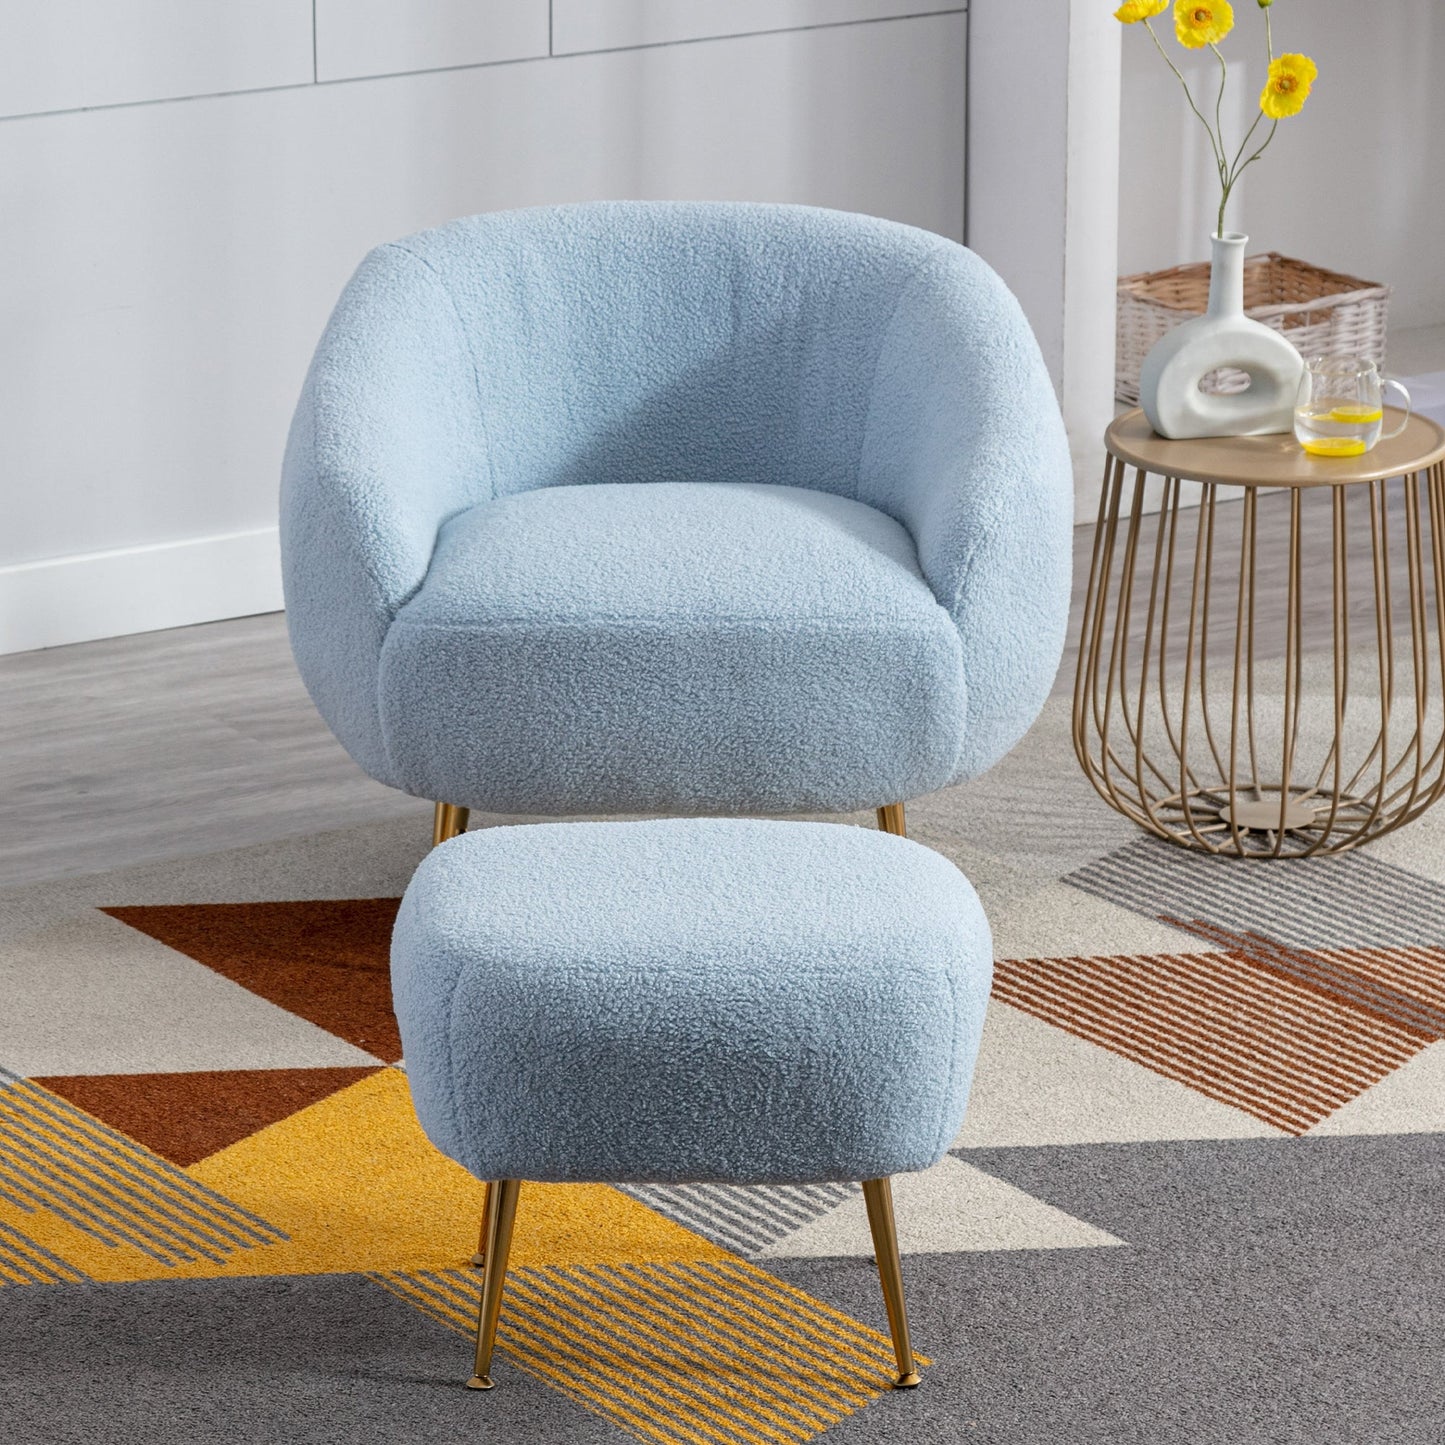 Modern Comfy Leisure Accent Chair with Ottoman by Blak Hom